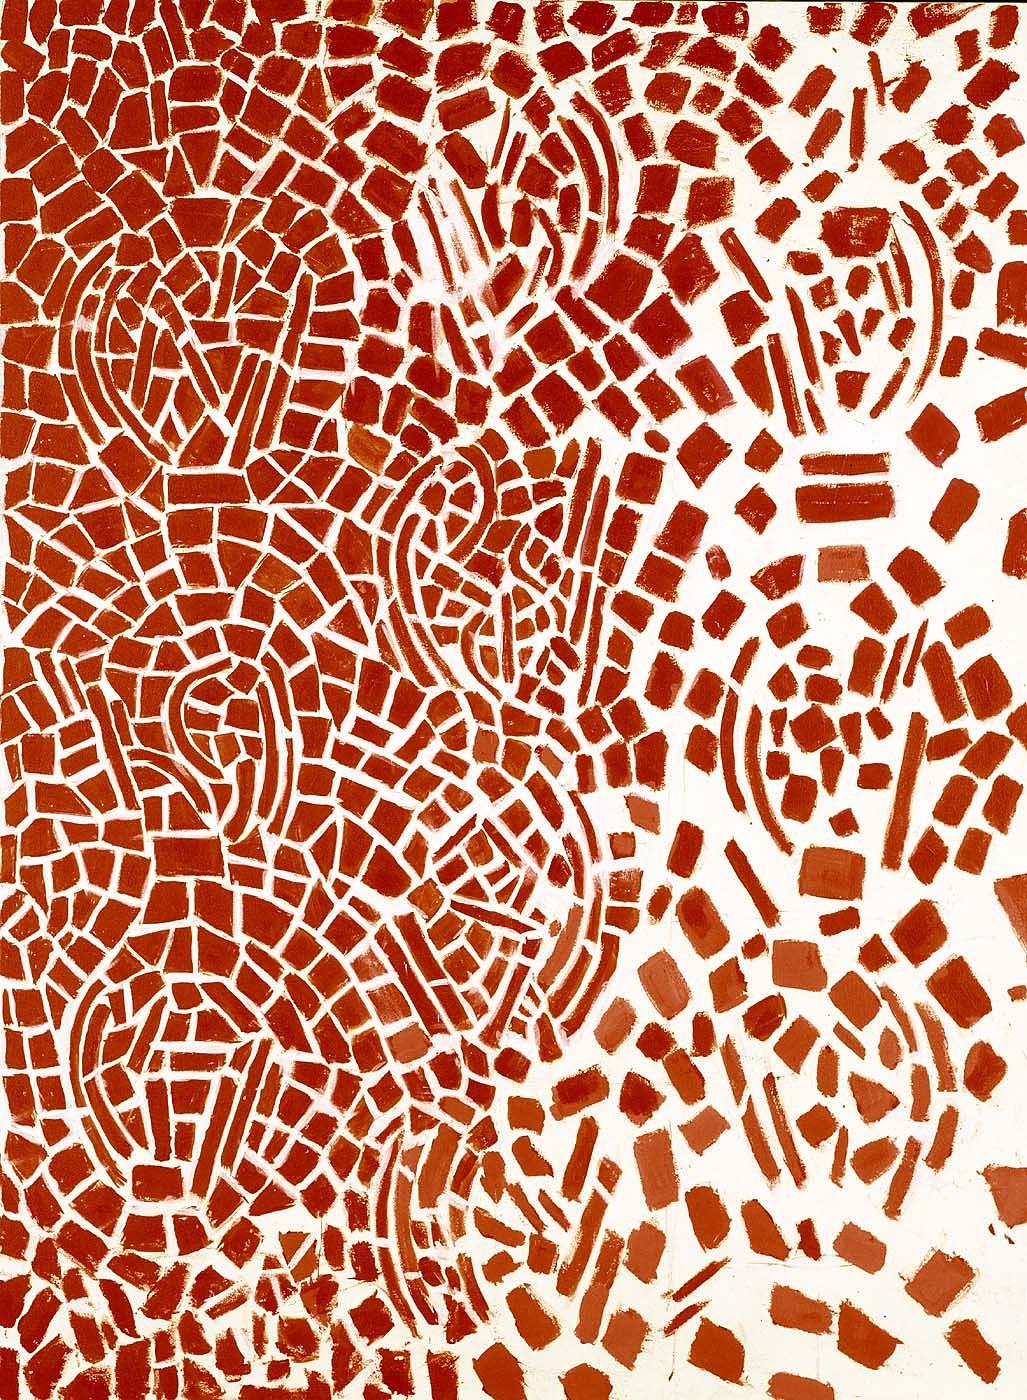 Abstract painting of swirling red tiles of paint on a white field.